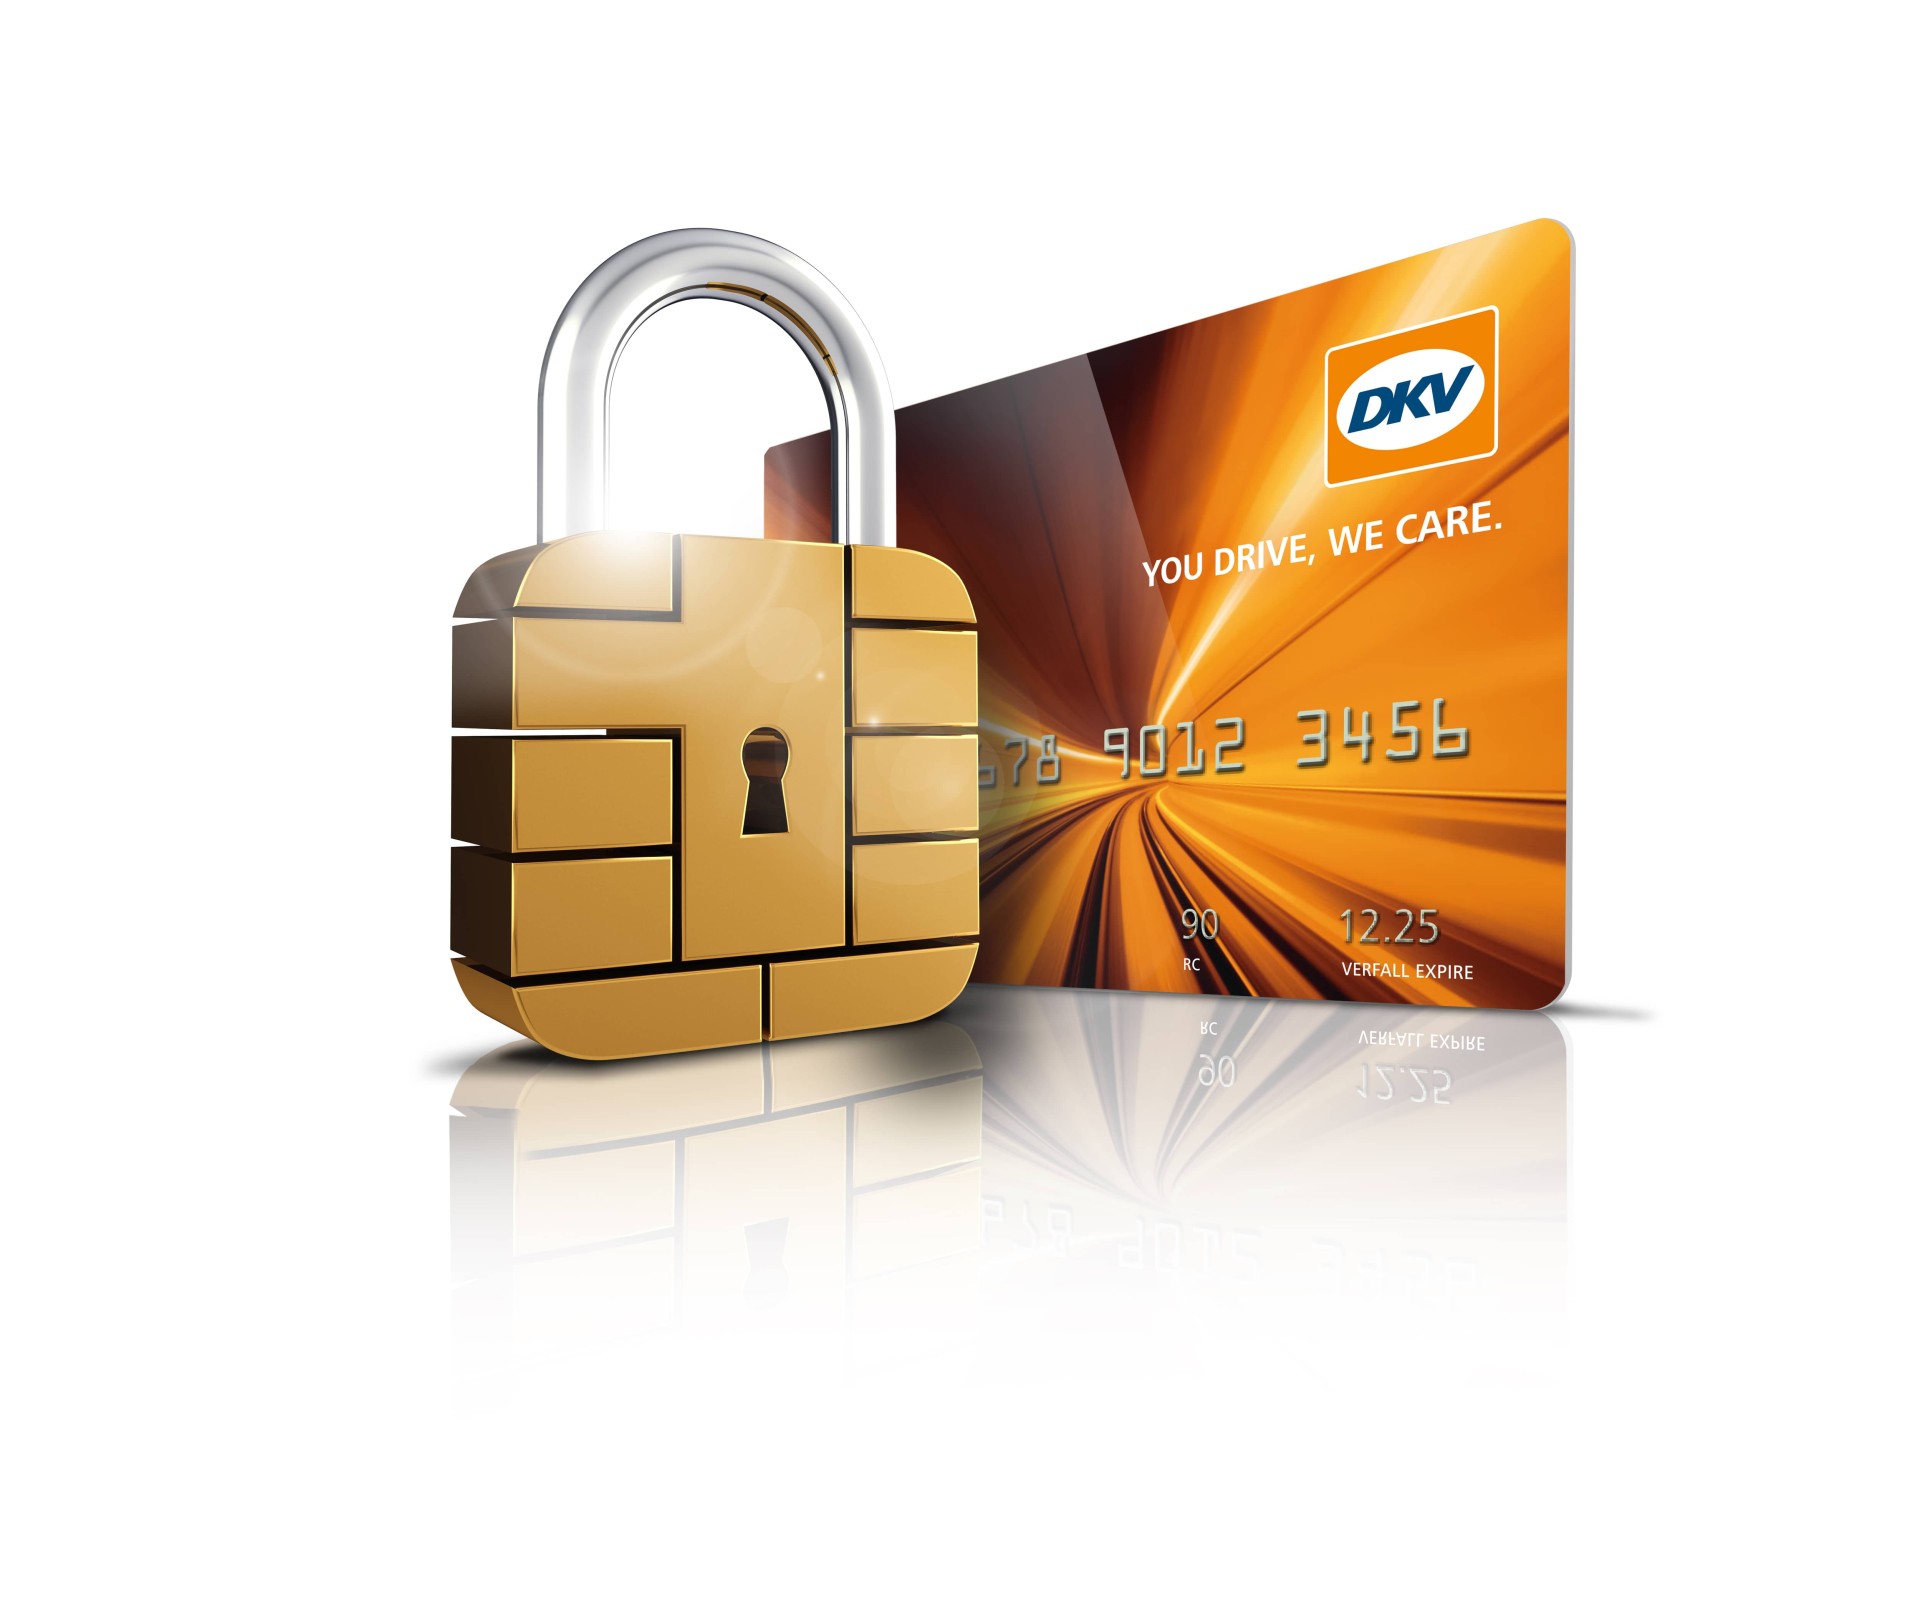 DKV Card Security